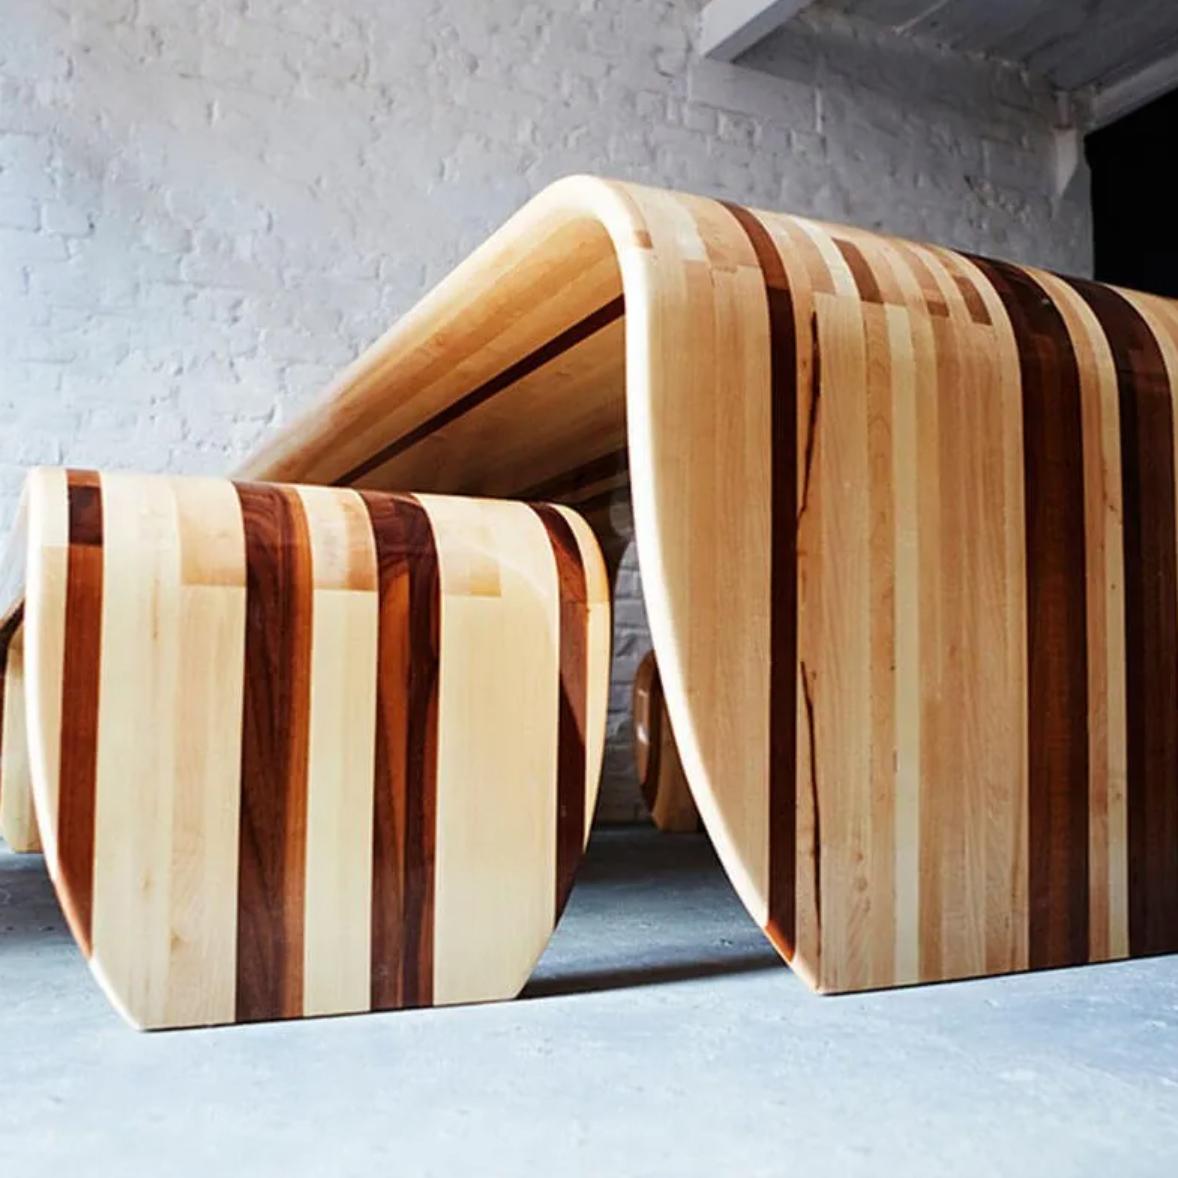 Other Set of Surf-Ace Table and 2 Benches by Duffy London